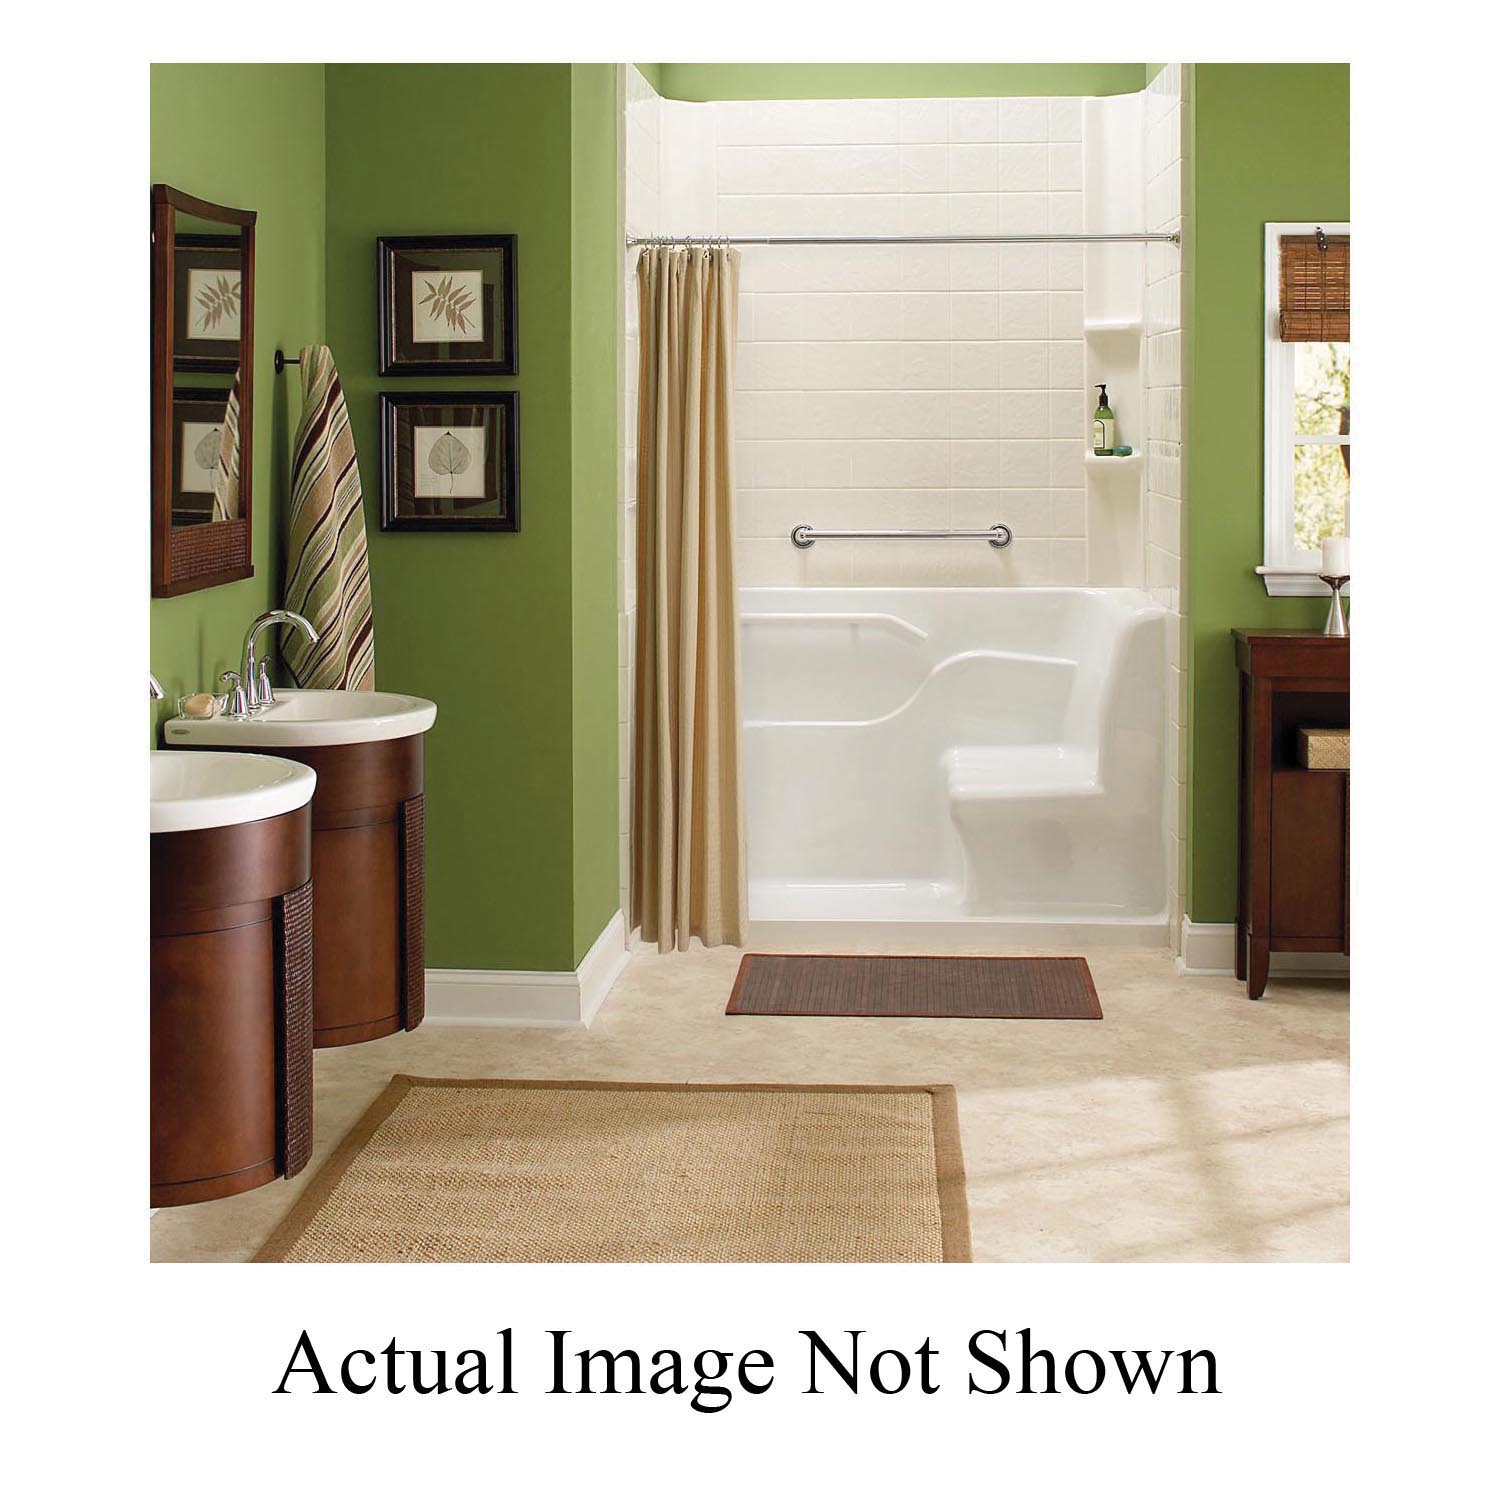 American Standard 3060SH.RW Right Drain Seated Safety Shower, 59-1/2 in L x 30 in W x 37 in H, Acrylic, White, Domestic